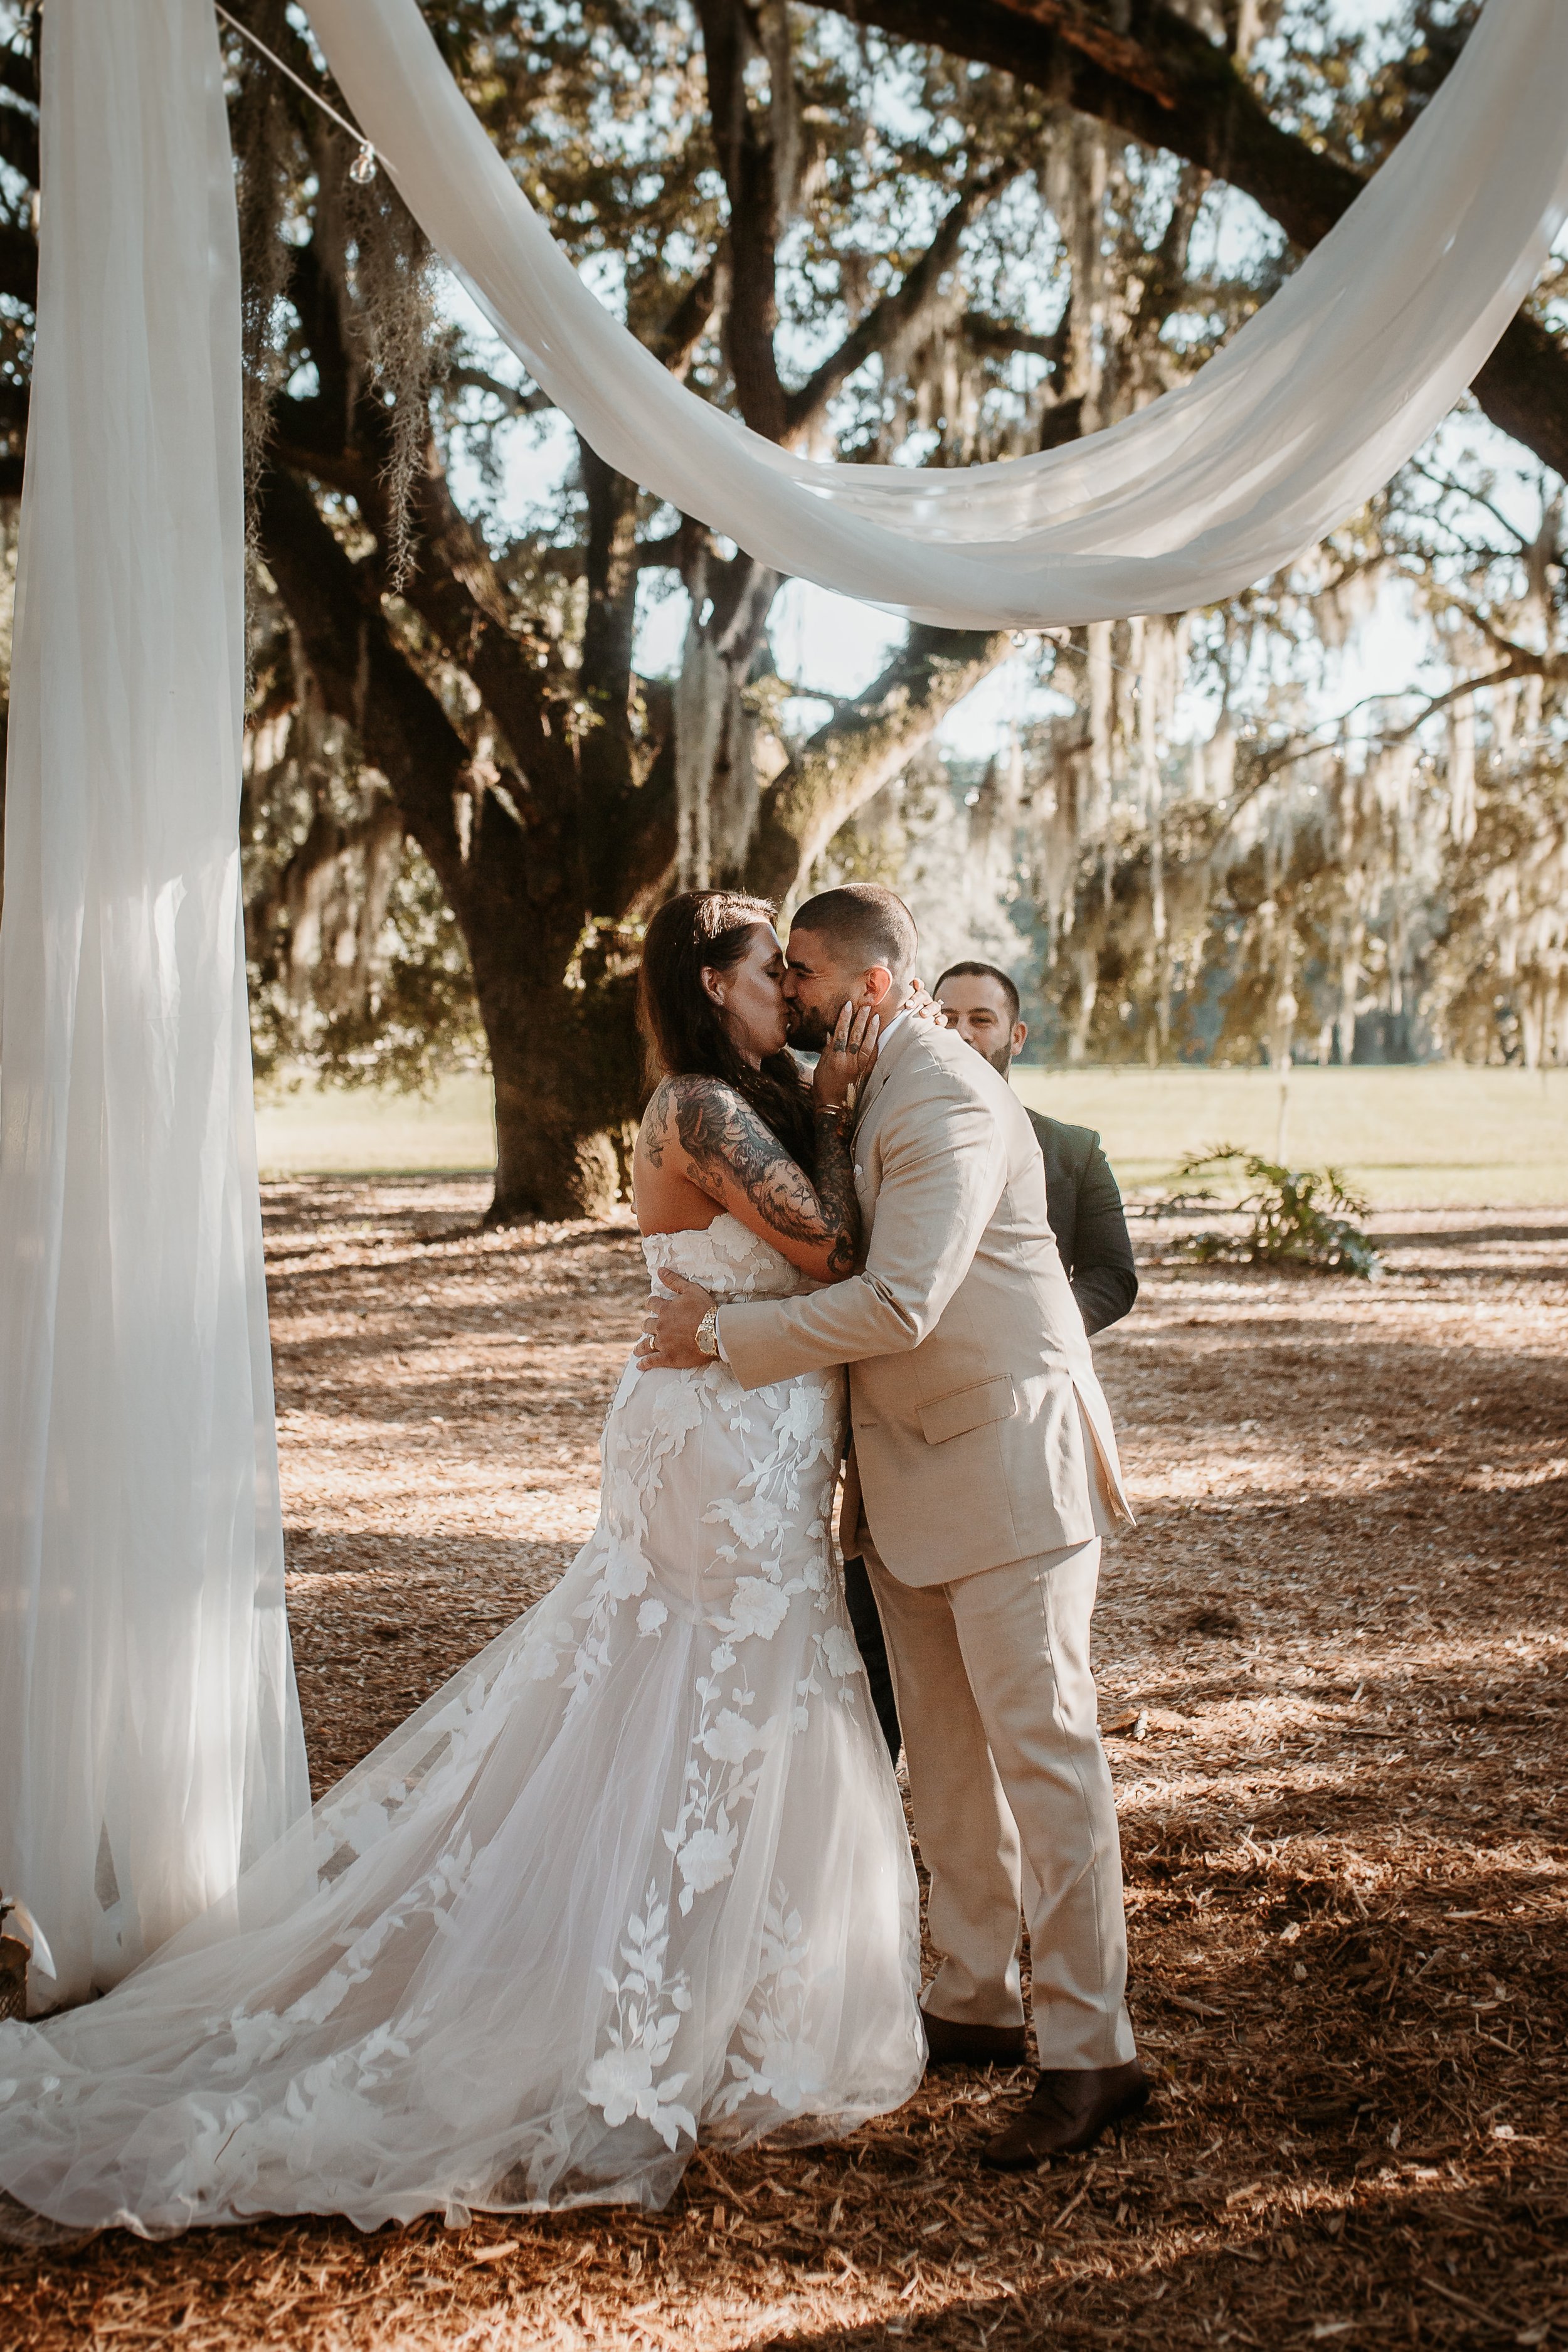 ivory-and-beau-blog-down-for-the-gown-real-bride-rebecca-ingram-wedding-dress-maggie-sottero-bridal-gown-strapless-wedding-dress-wedding-gown-savannah-bridal-shop-savannah-bridal-boutique-savannah-georgia-Annie & Cam Wedding-536.jpg